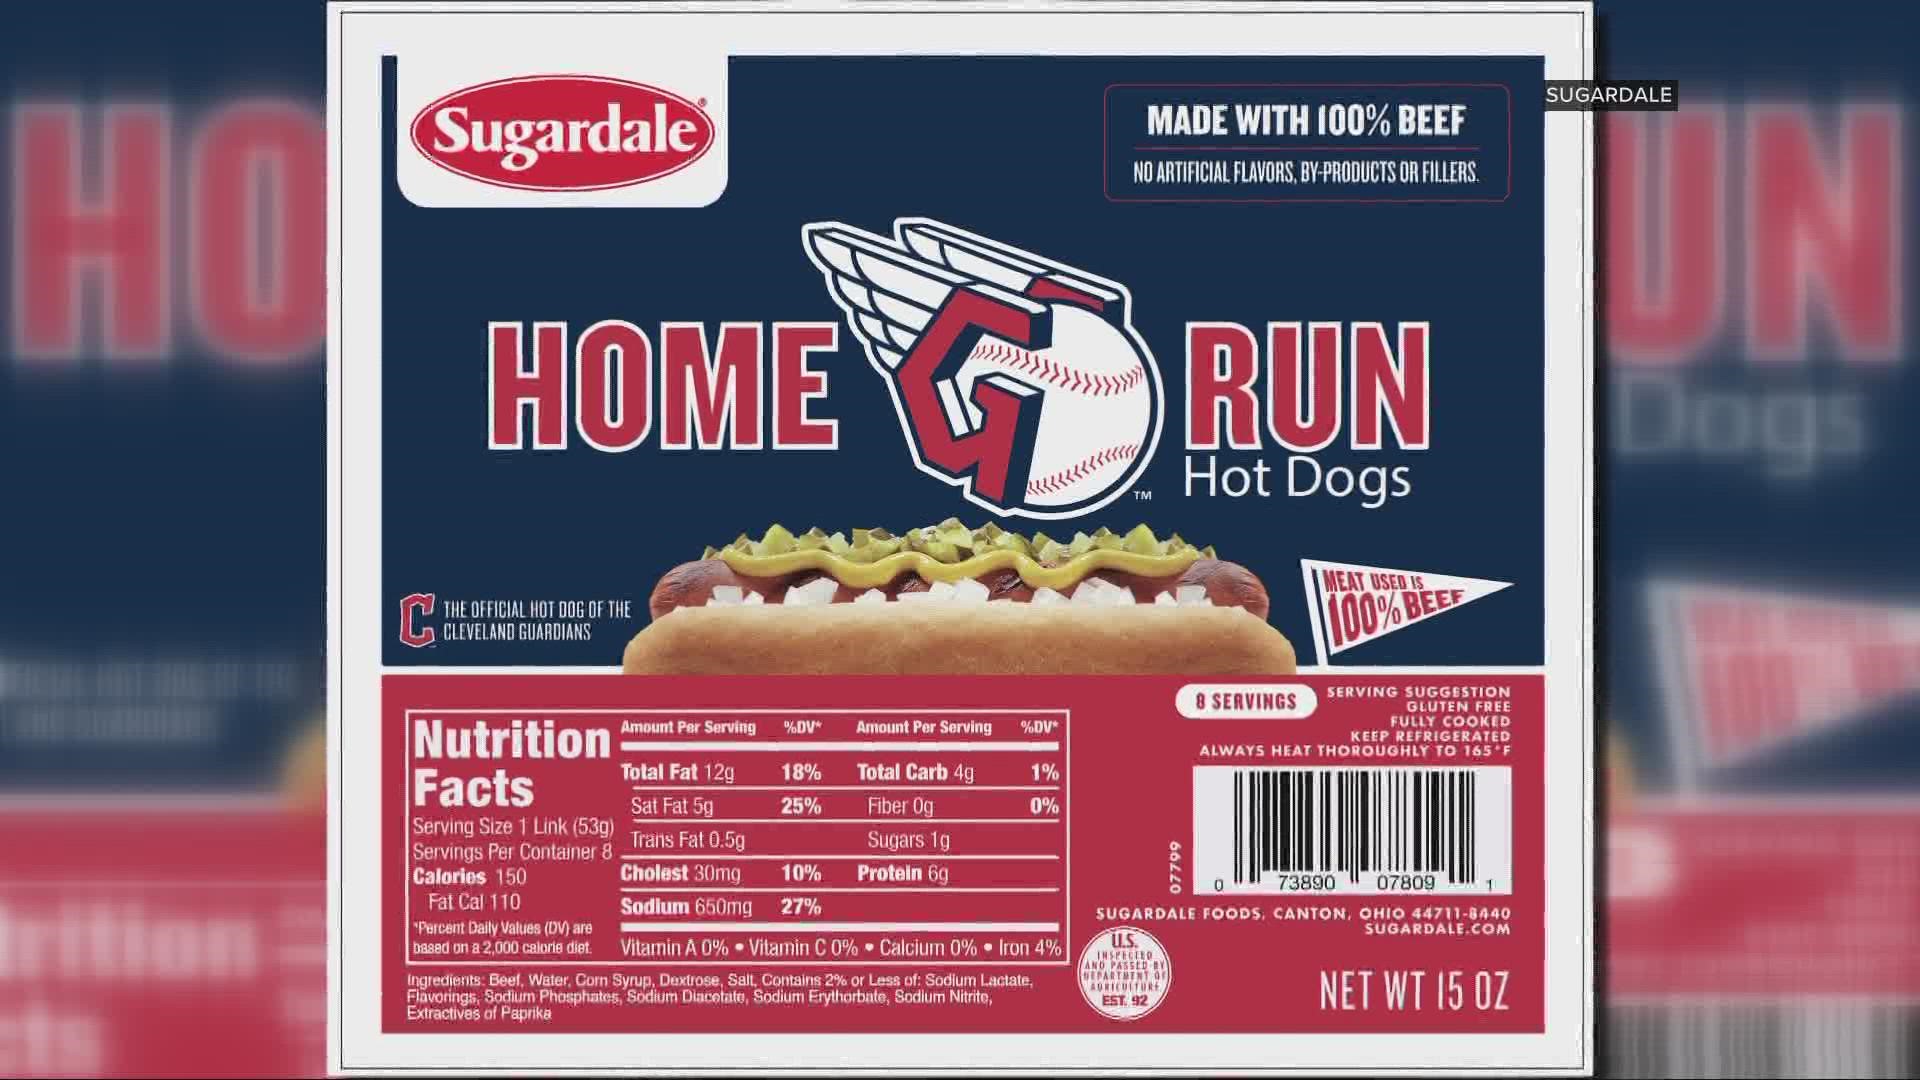 Just in time for Cleveland Guardians baseball! You can pick up some Sugardale Home Run Hot Dogs at a store near you.